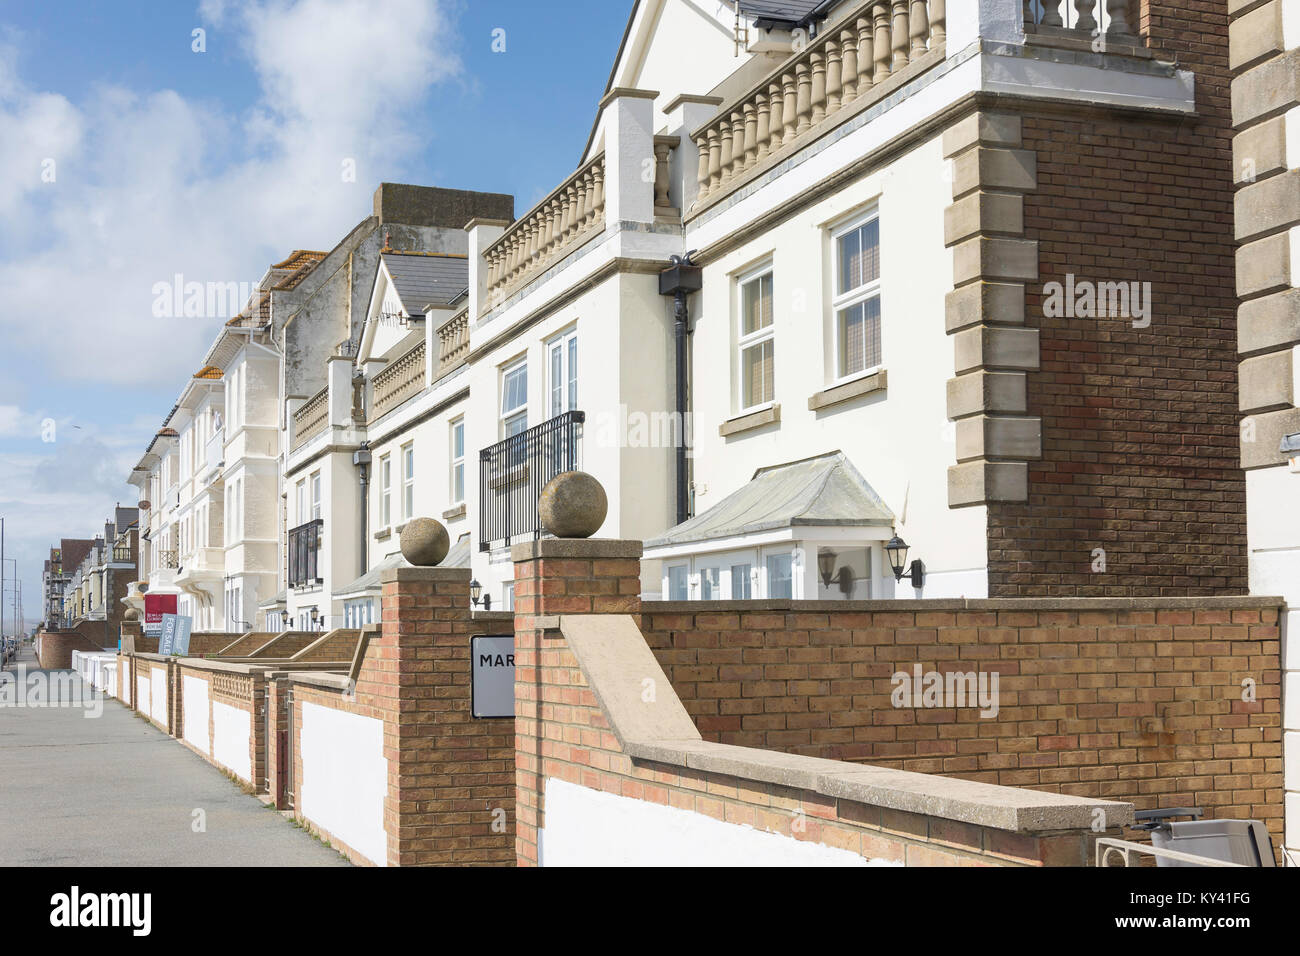 Seafront houses on The Esplanade, Seaford, East Sussex, England, United Kingdom Stock Photo